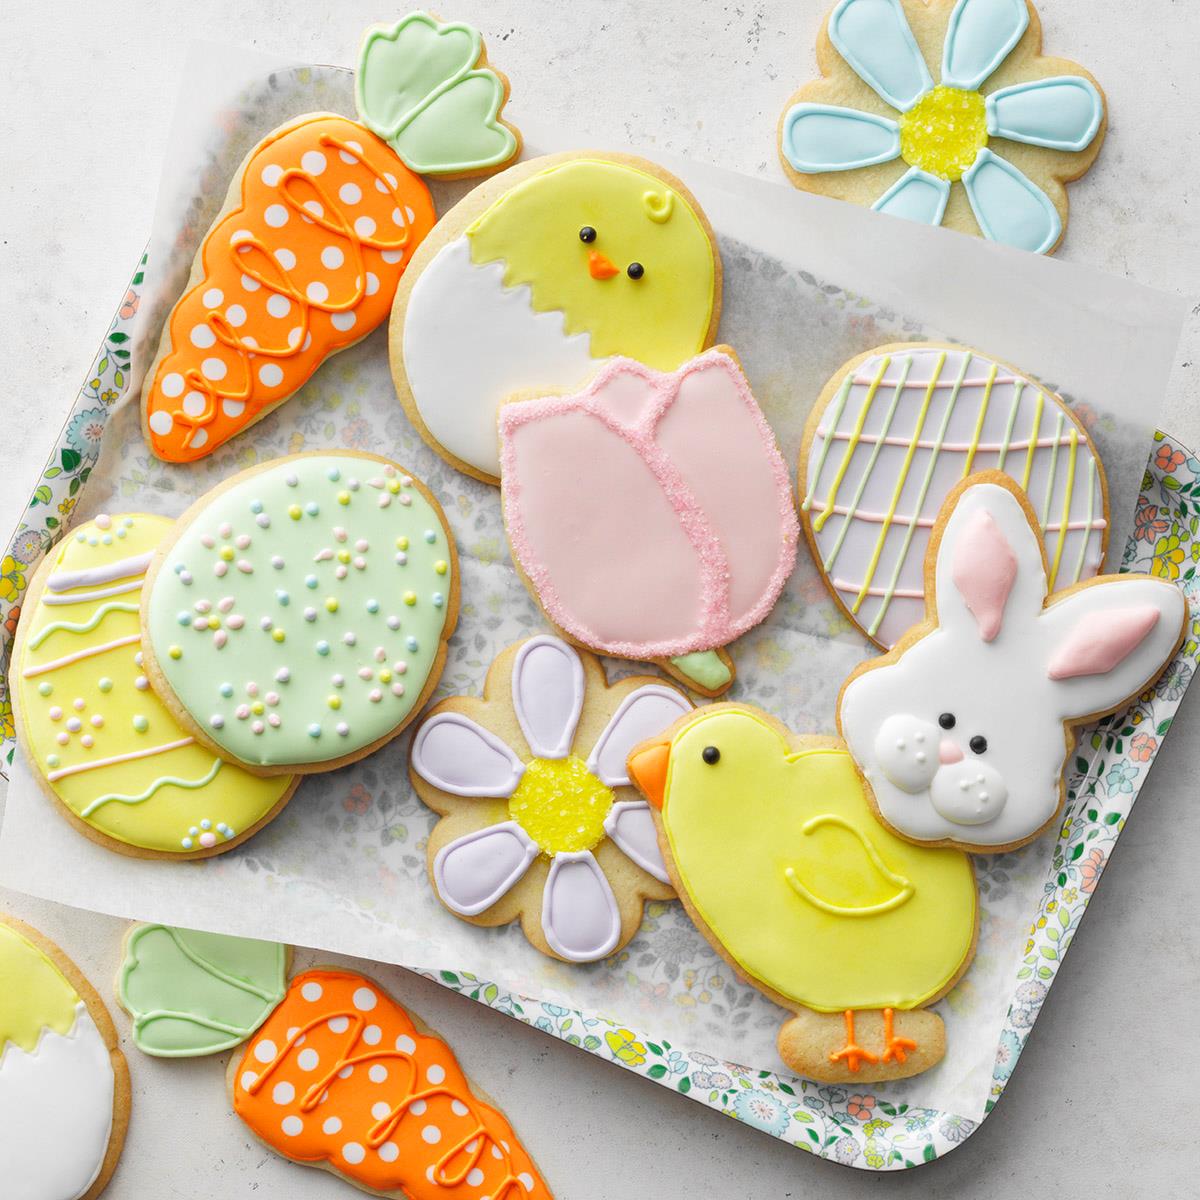 Easter Sugar Cookies Recipe: How to Make It